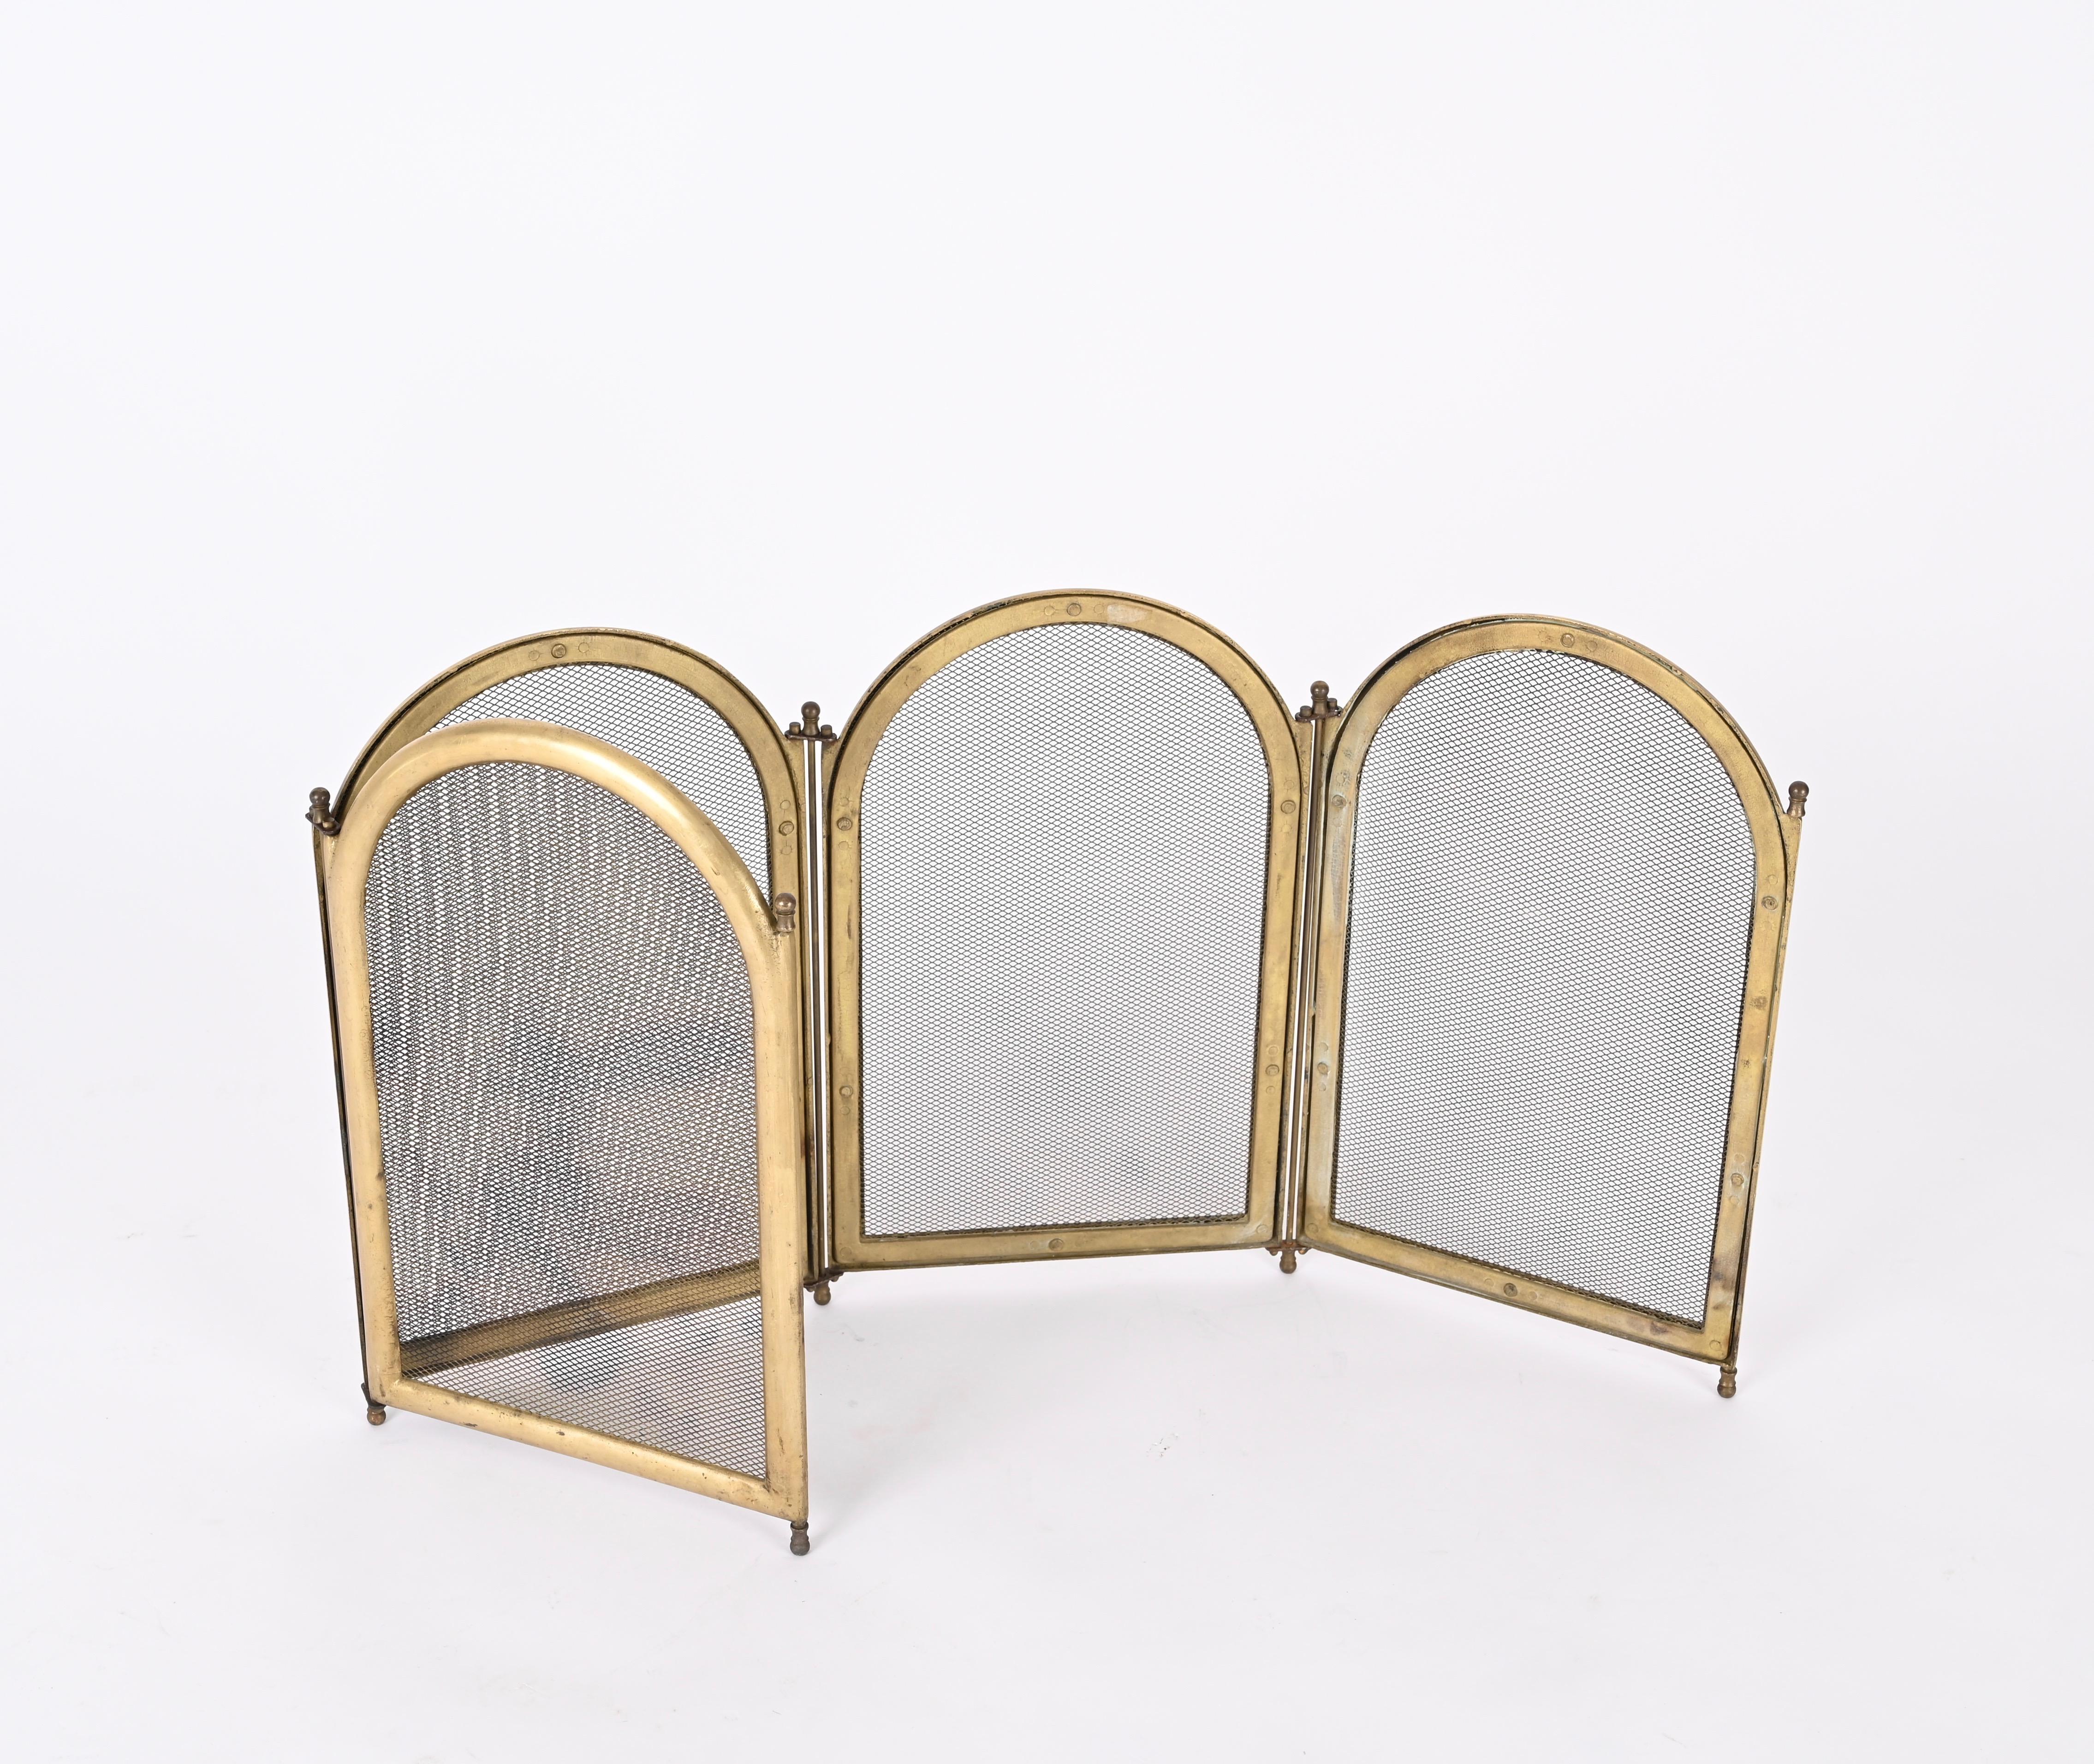 Italian Solid Brass Folding Fireplace Screen or Fire Guard, Italy 1960s For Sale 3